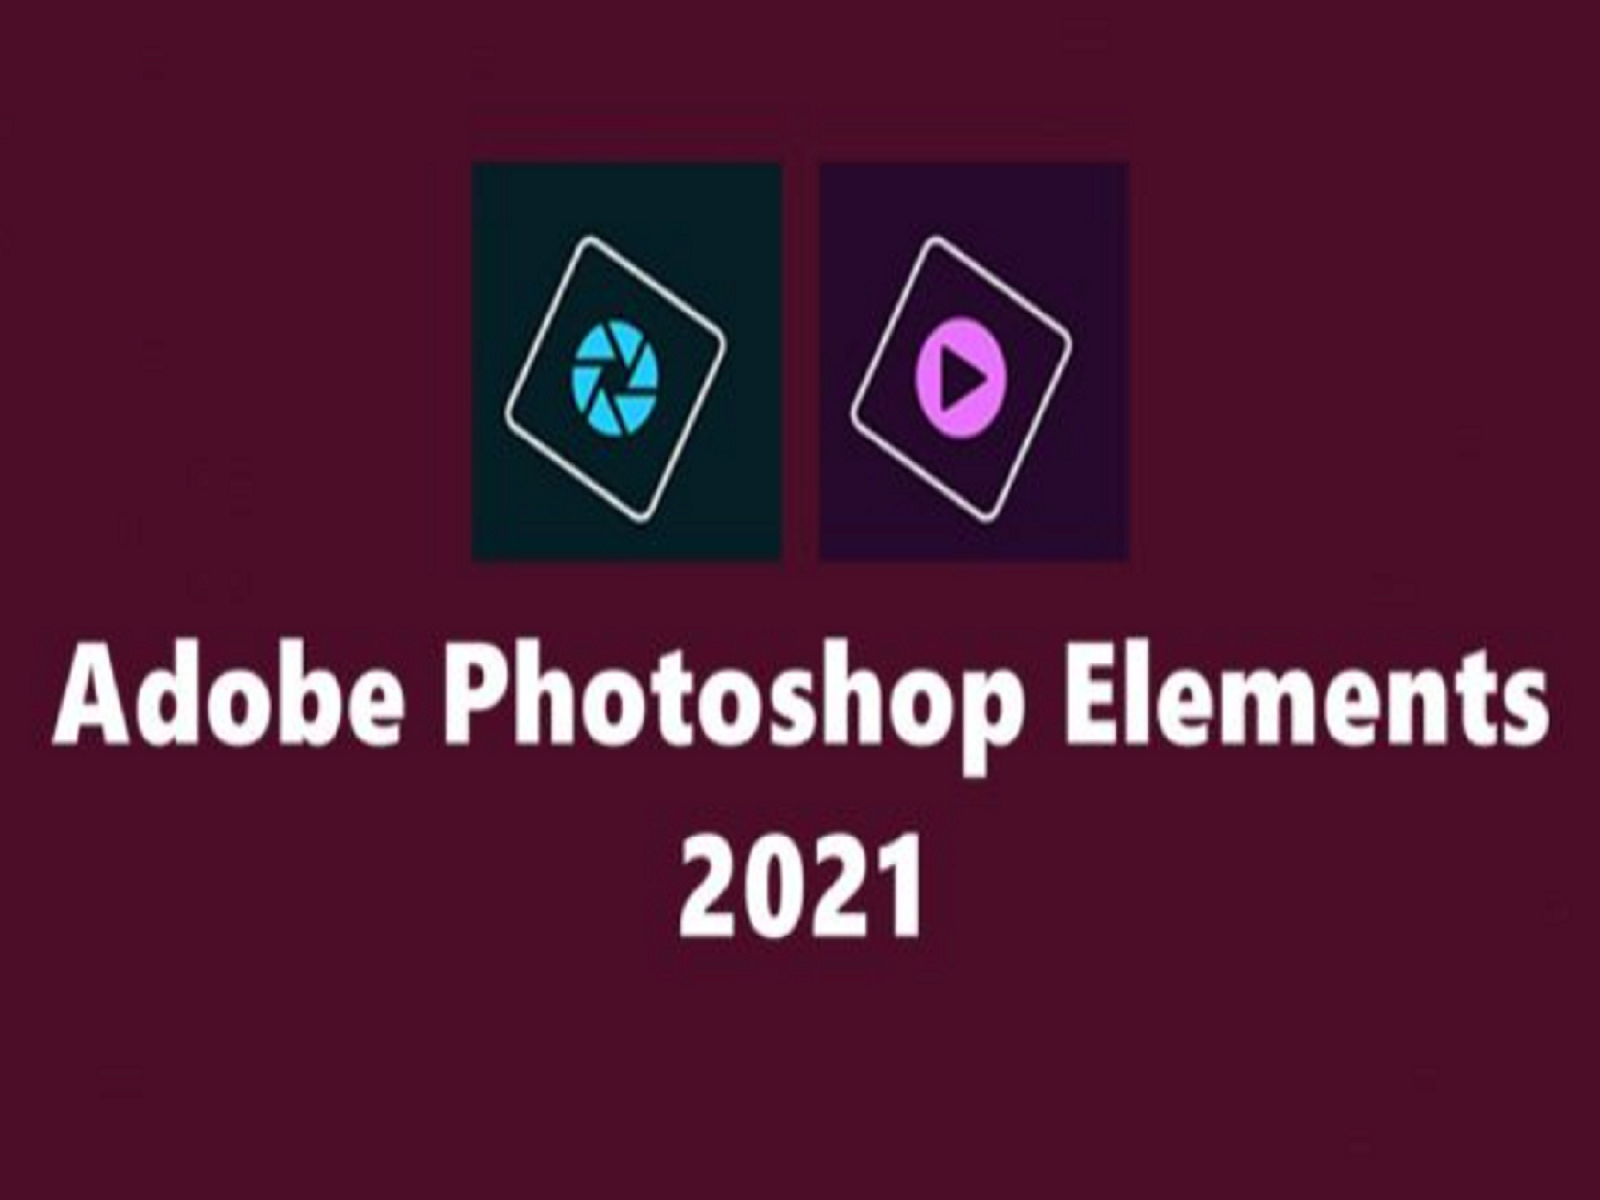 ⭐ Adobe Photoshop Elements 2021 Full Version ⭐ Lifetime Activation ⭐ PRE ACTIVATED ⭐